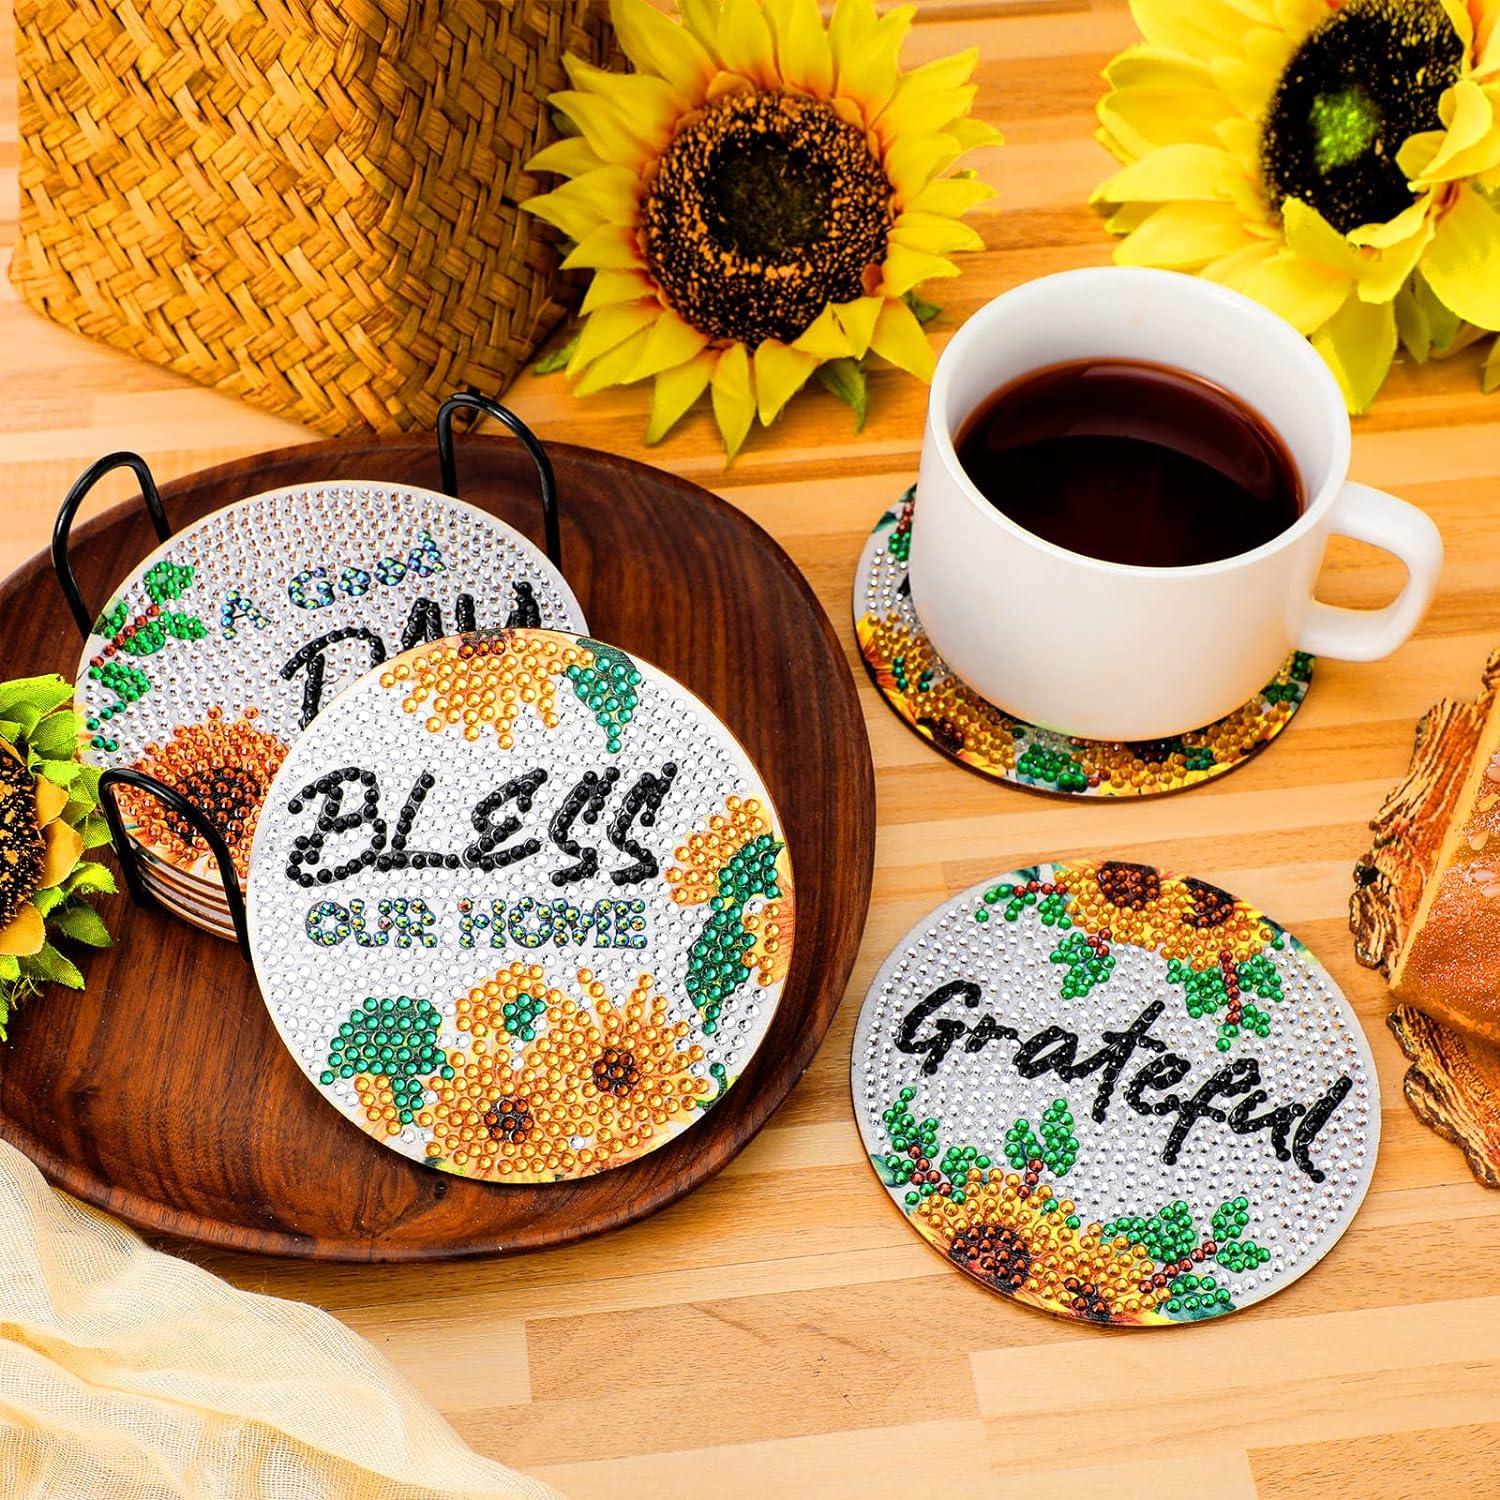 8 Pcs Diamond Coasters Farmhouse Diamond Painting Coasters with Holder DIY  Inspirational Coasters Rustic Absorbent Coasters for Drinks 4 Inch Diamond  Painting Kit Outdoor Coasters (Sunflowers)